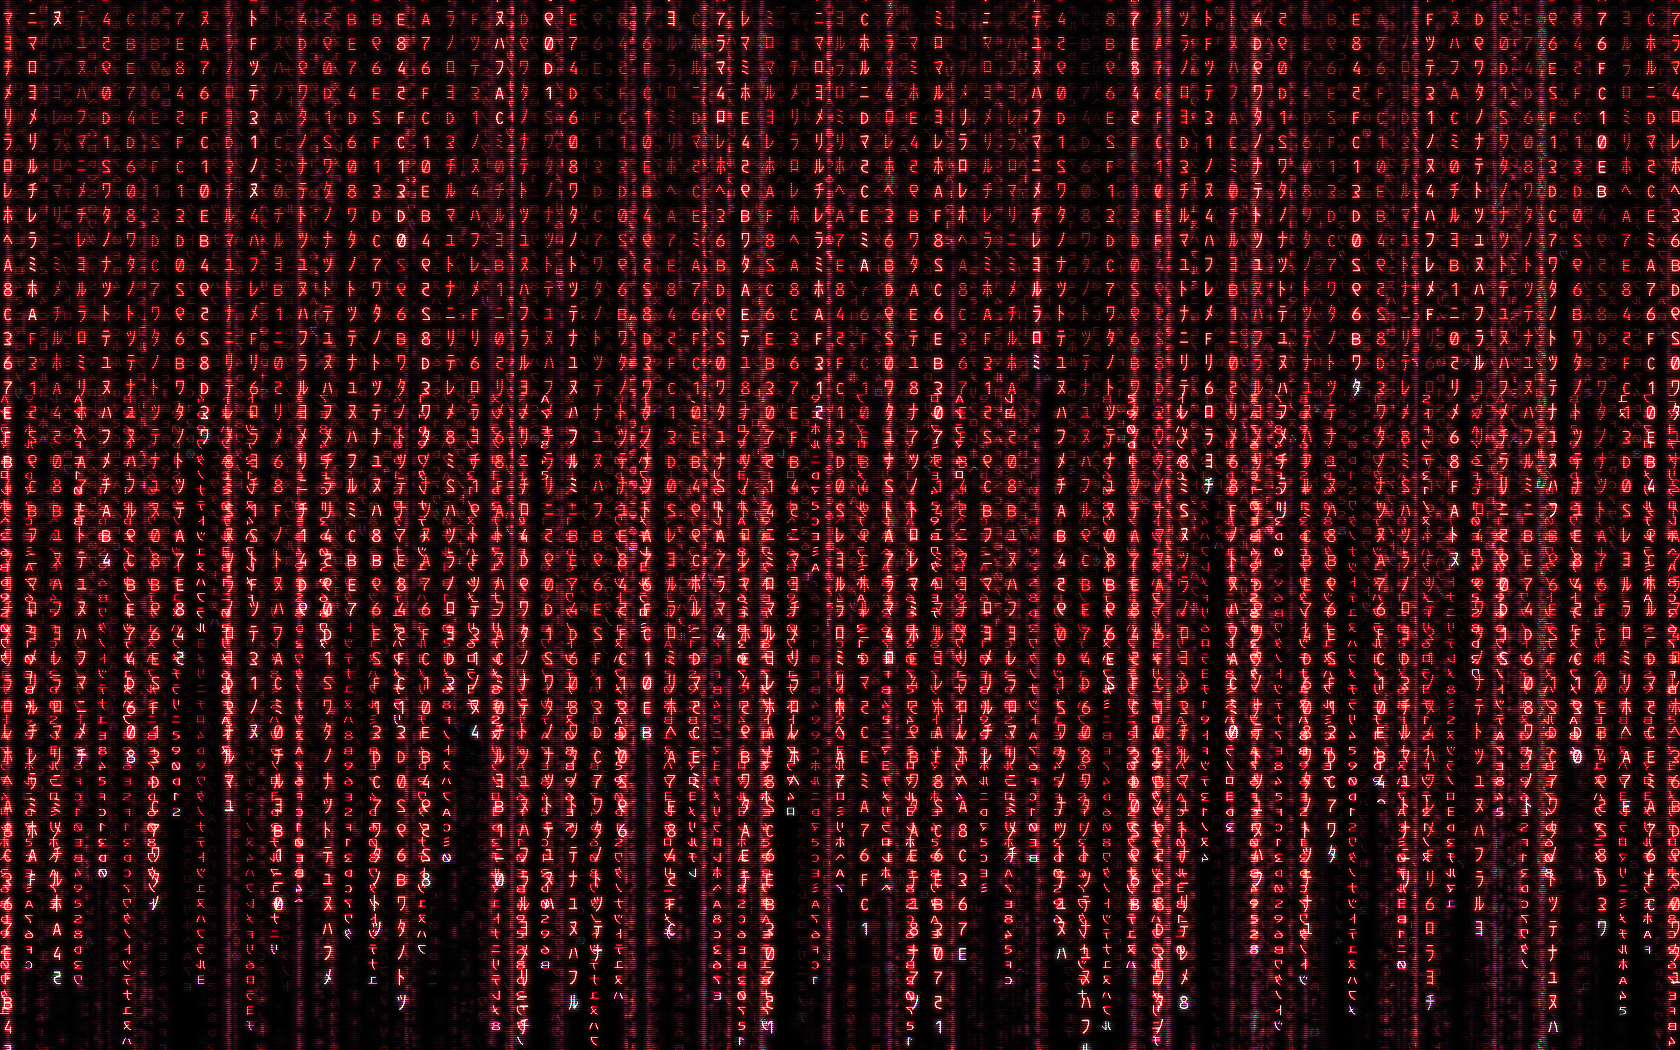 General 1680x1050 The Matrix code red movies science fiction digital art